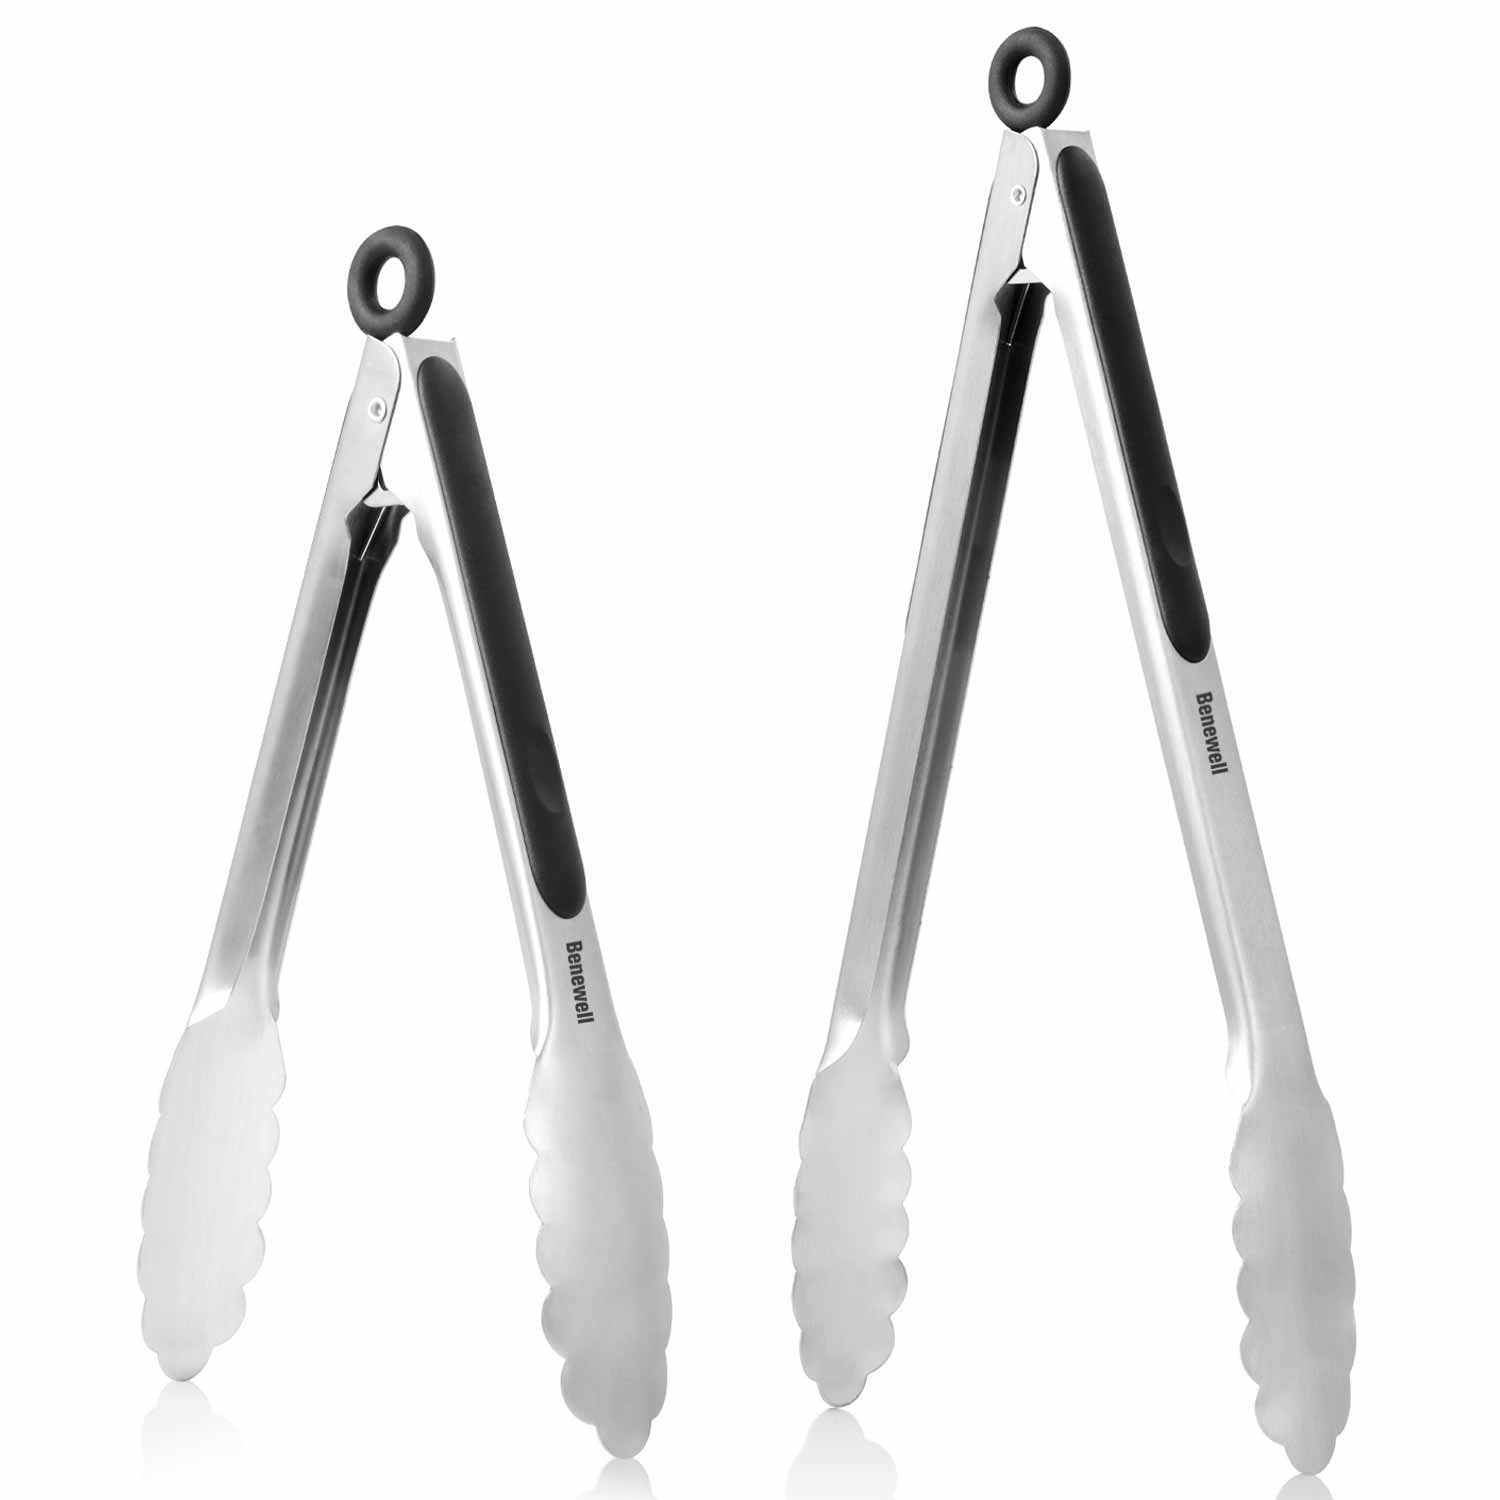 Extodry Stainless Steel Kitchen Tongs,2 Packs Cooking Tongs,9 and 12 Set,Non Slip Grip,Food Tongs with Heat Resistant Handle,Great for Cooking and Barbecue 